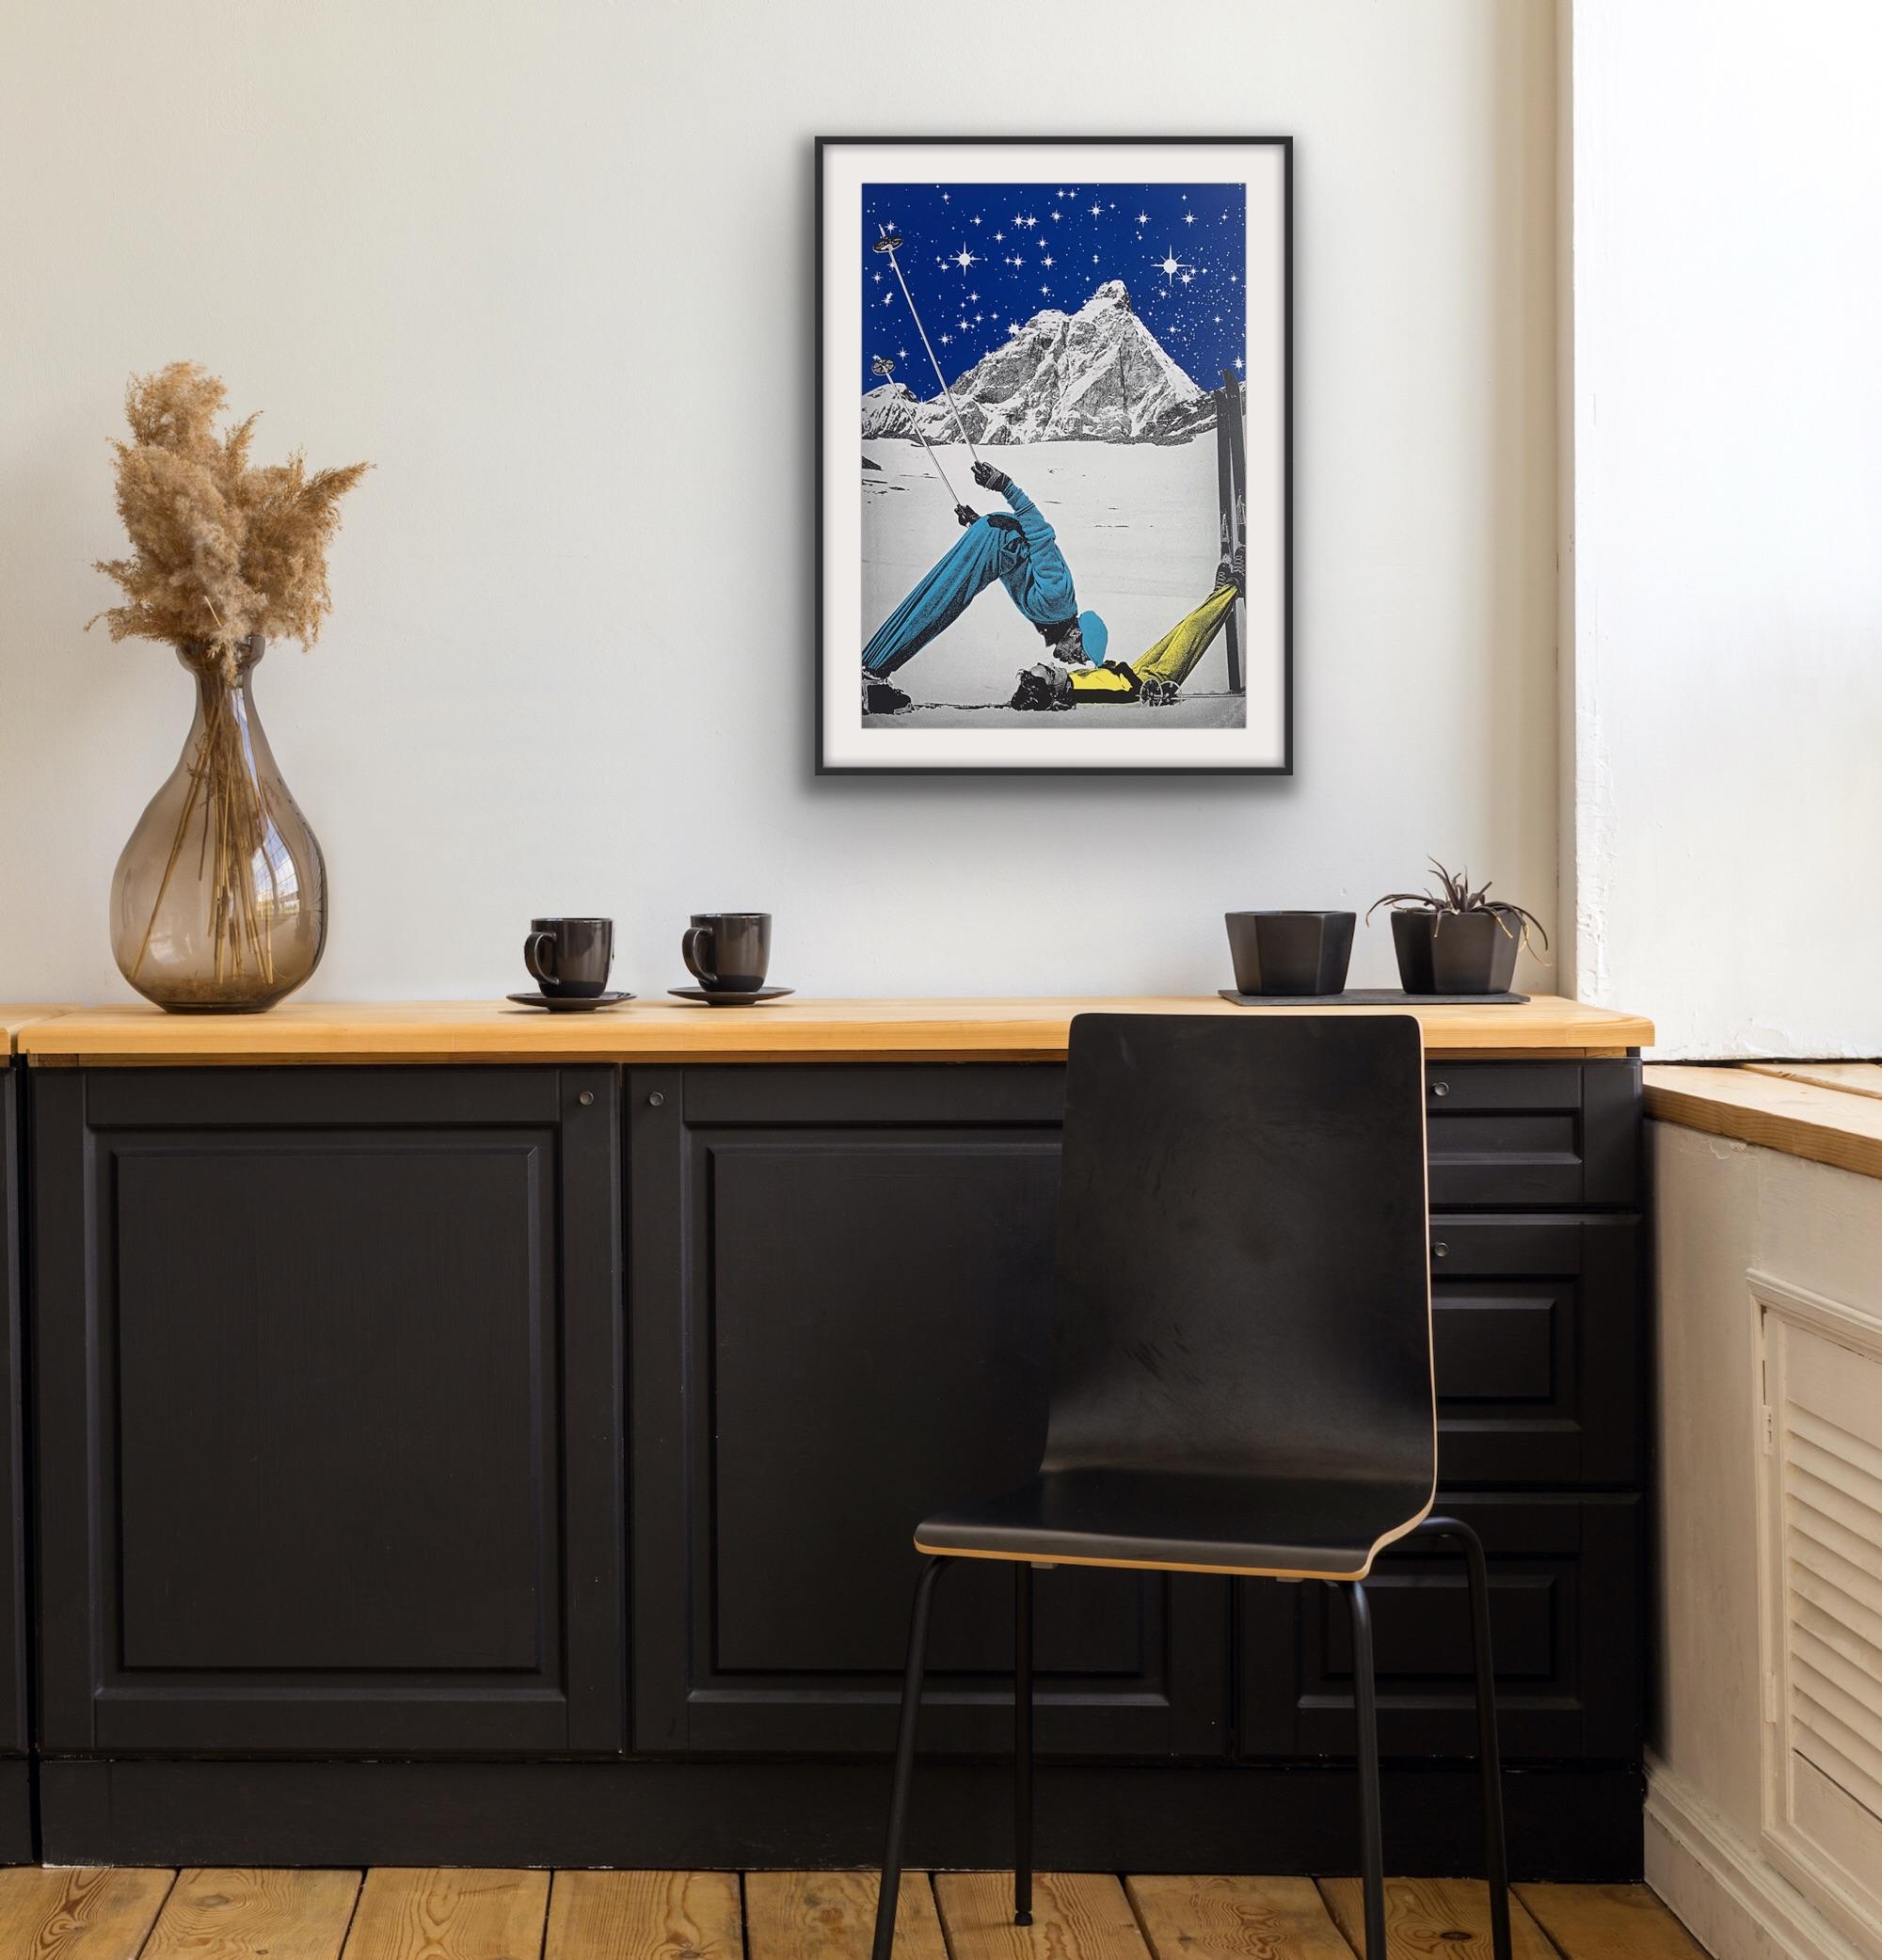 Ski Paradise, Anne Storno, Limited Edition print, Sport art, Skiiing art - Contemporary Print by Anne Storno 